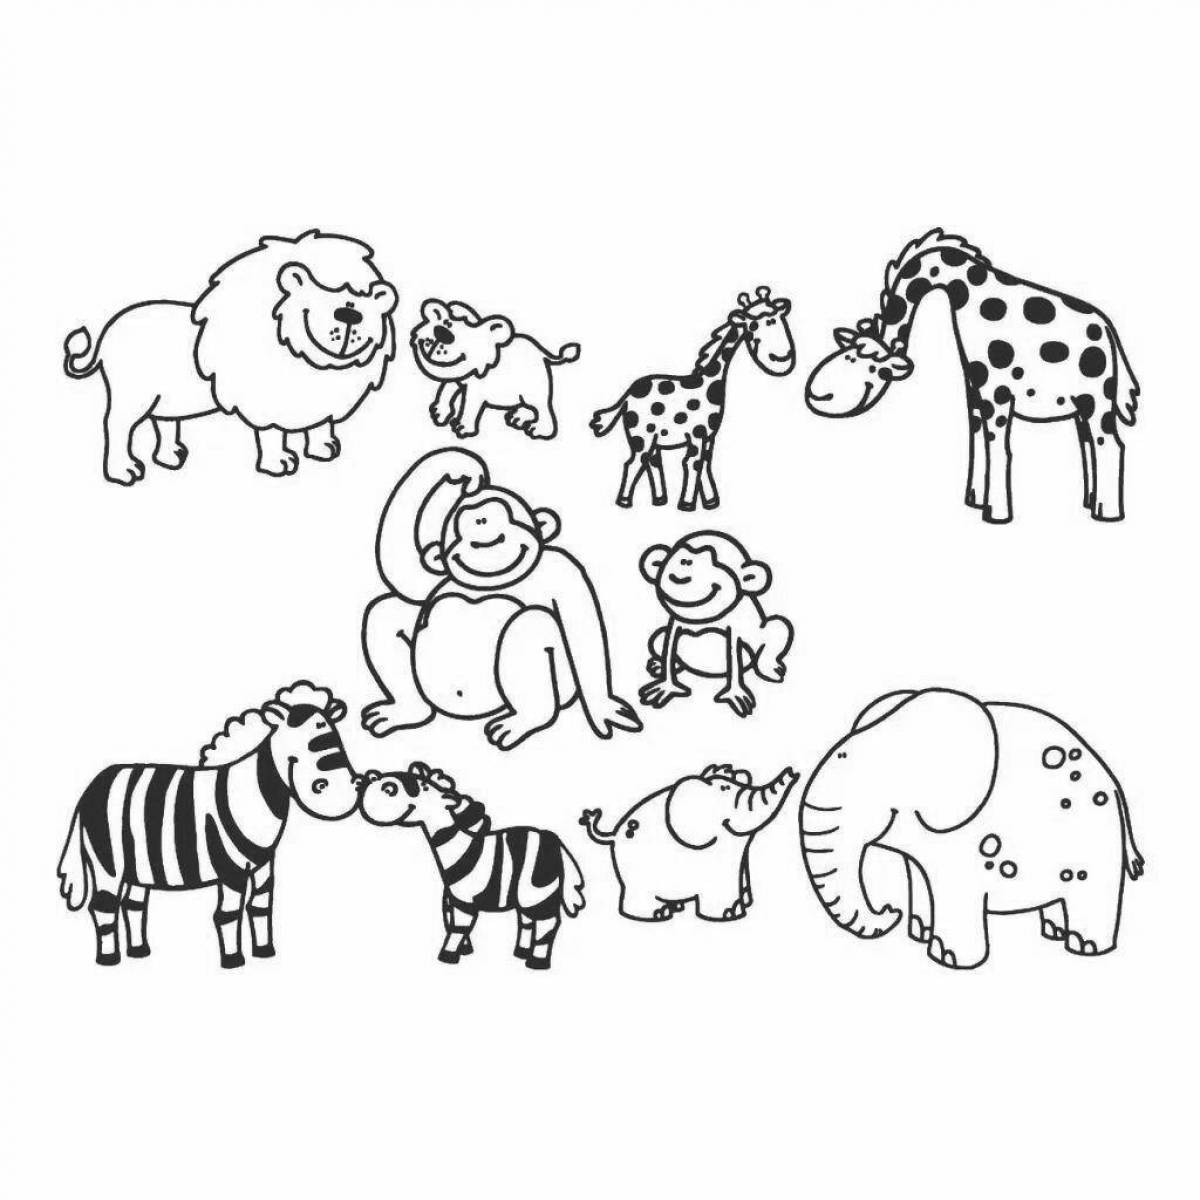 Live animal coloring games